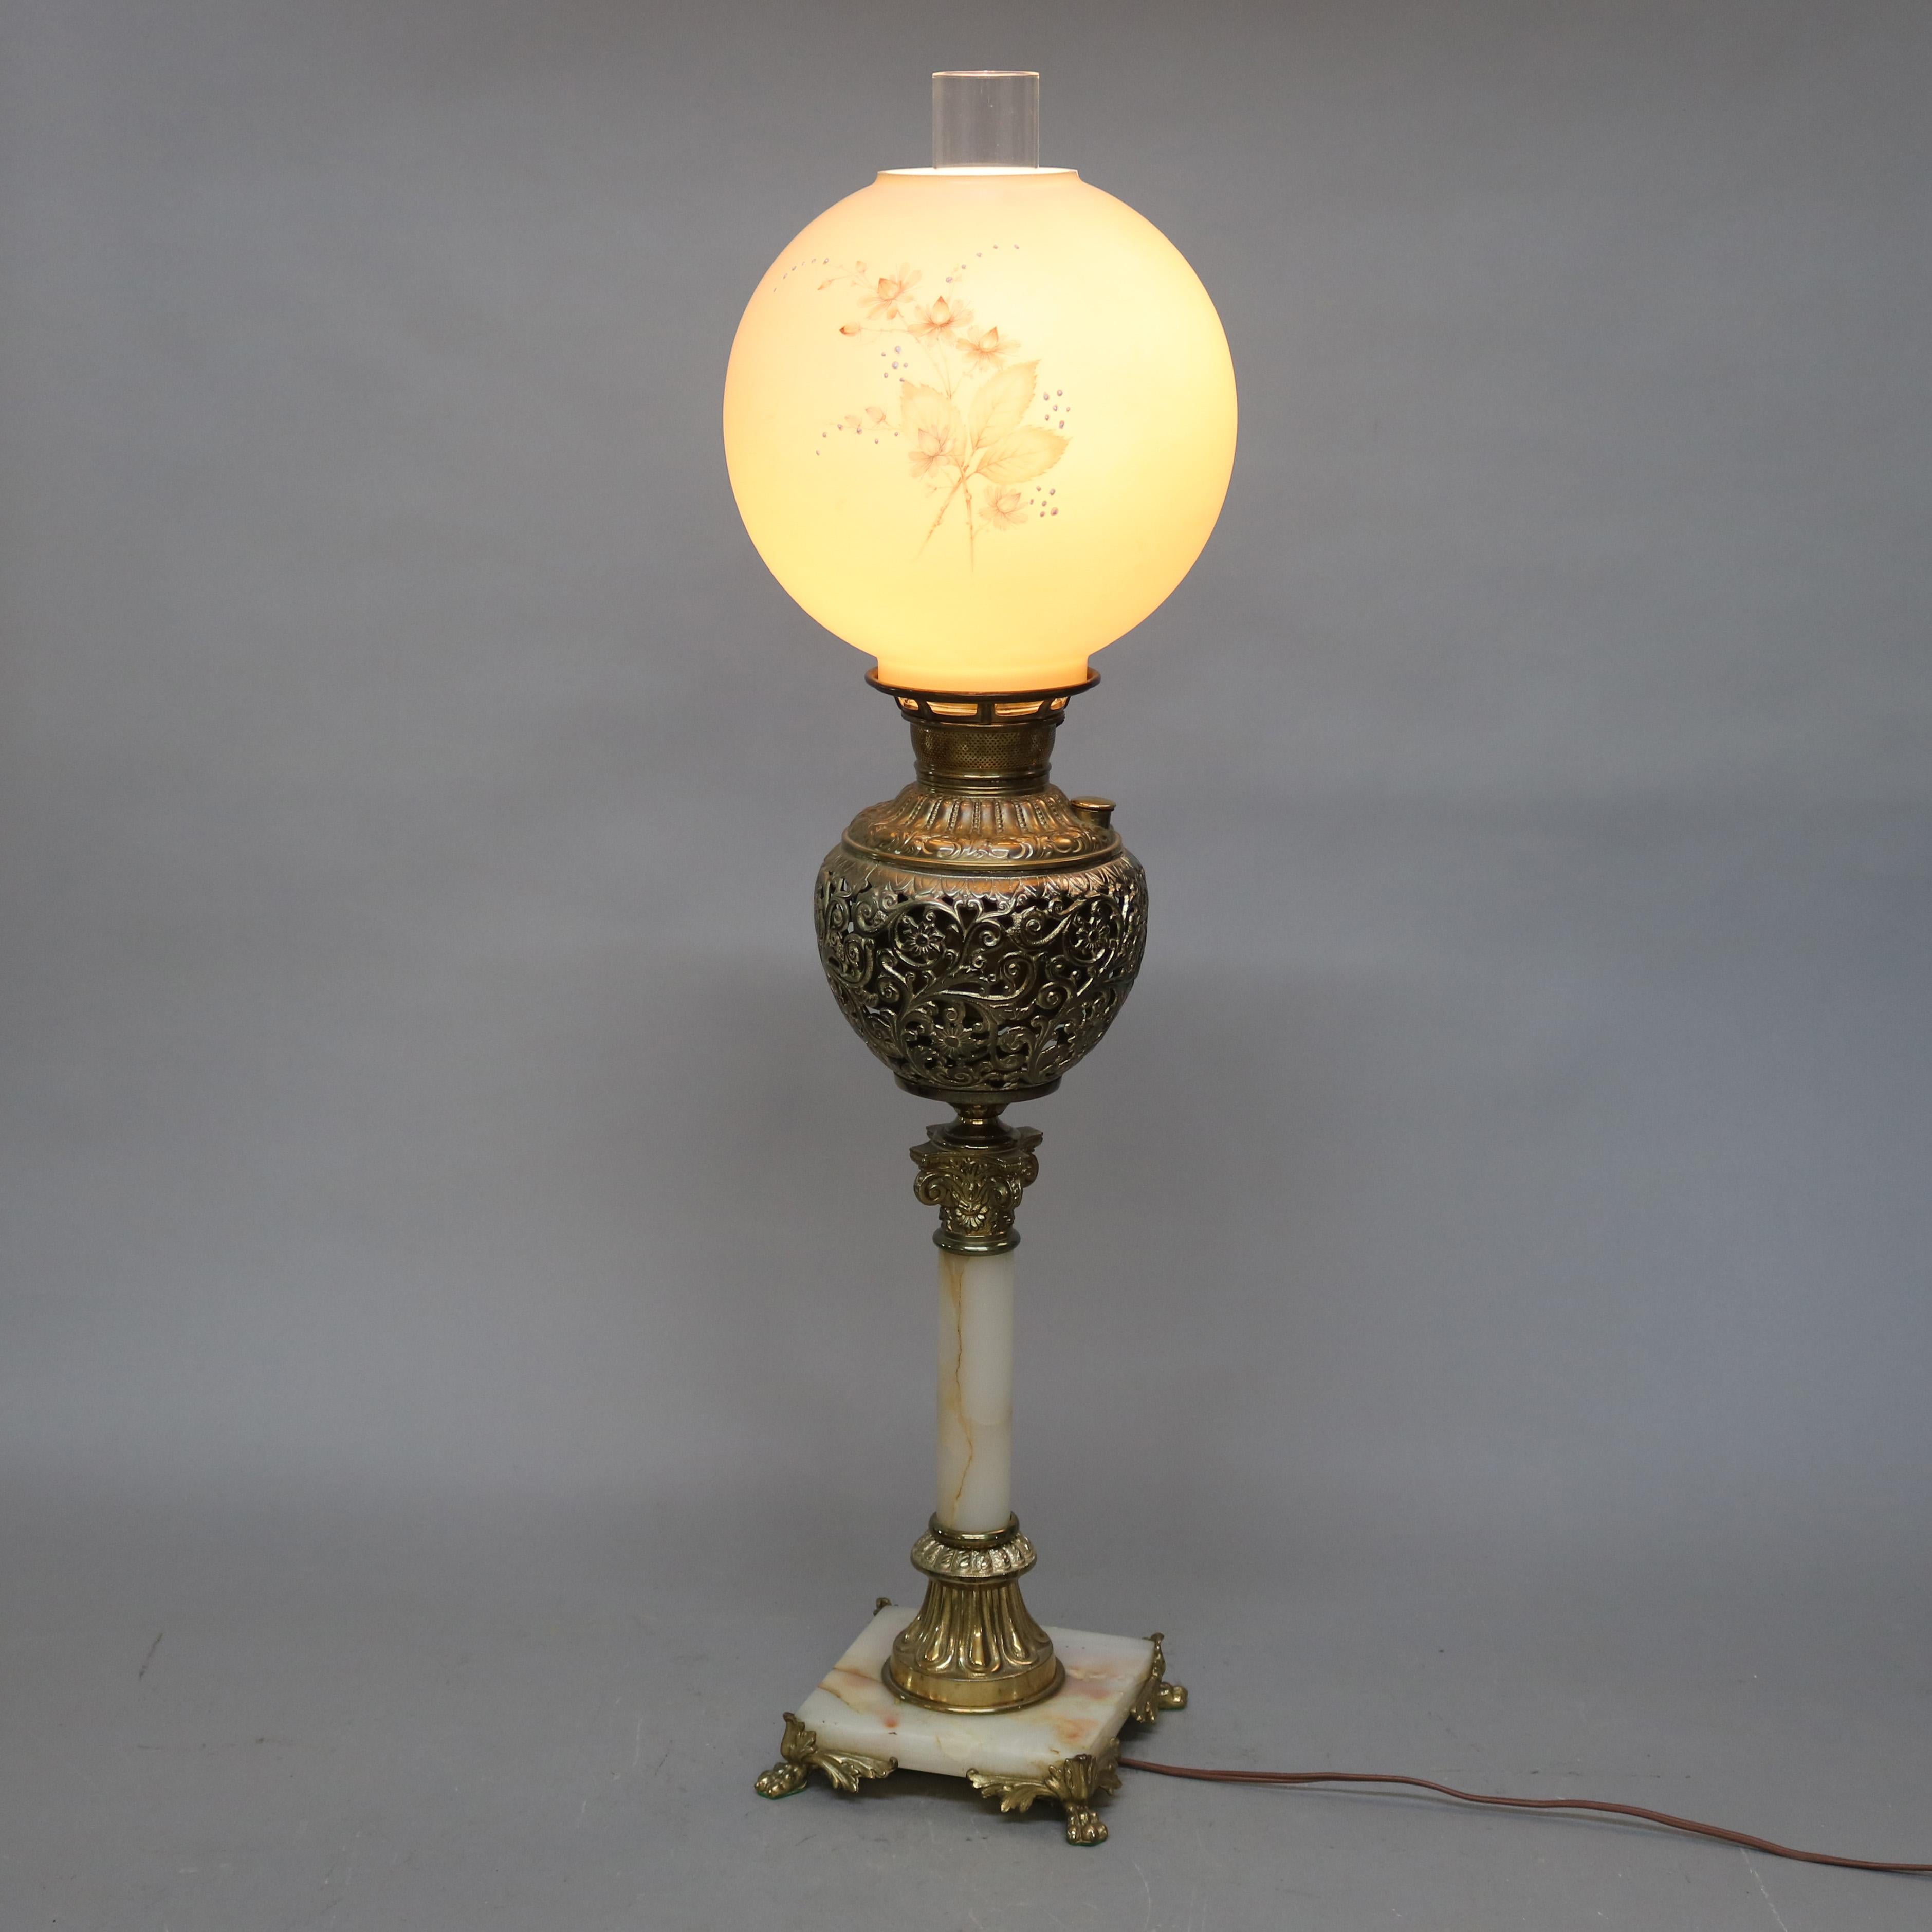 An antique Victorian parlor lamp offers floral painted shade surmounting gilt metal base with onyx column and footed base, circa 1890.

Measures - 33.25